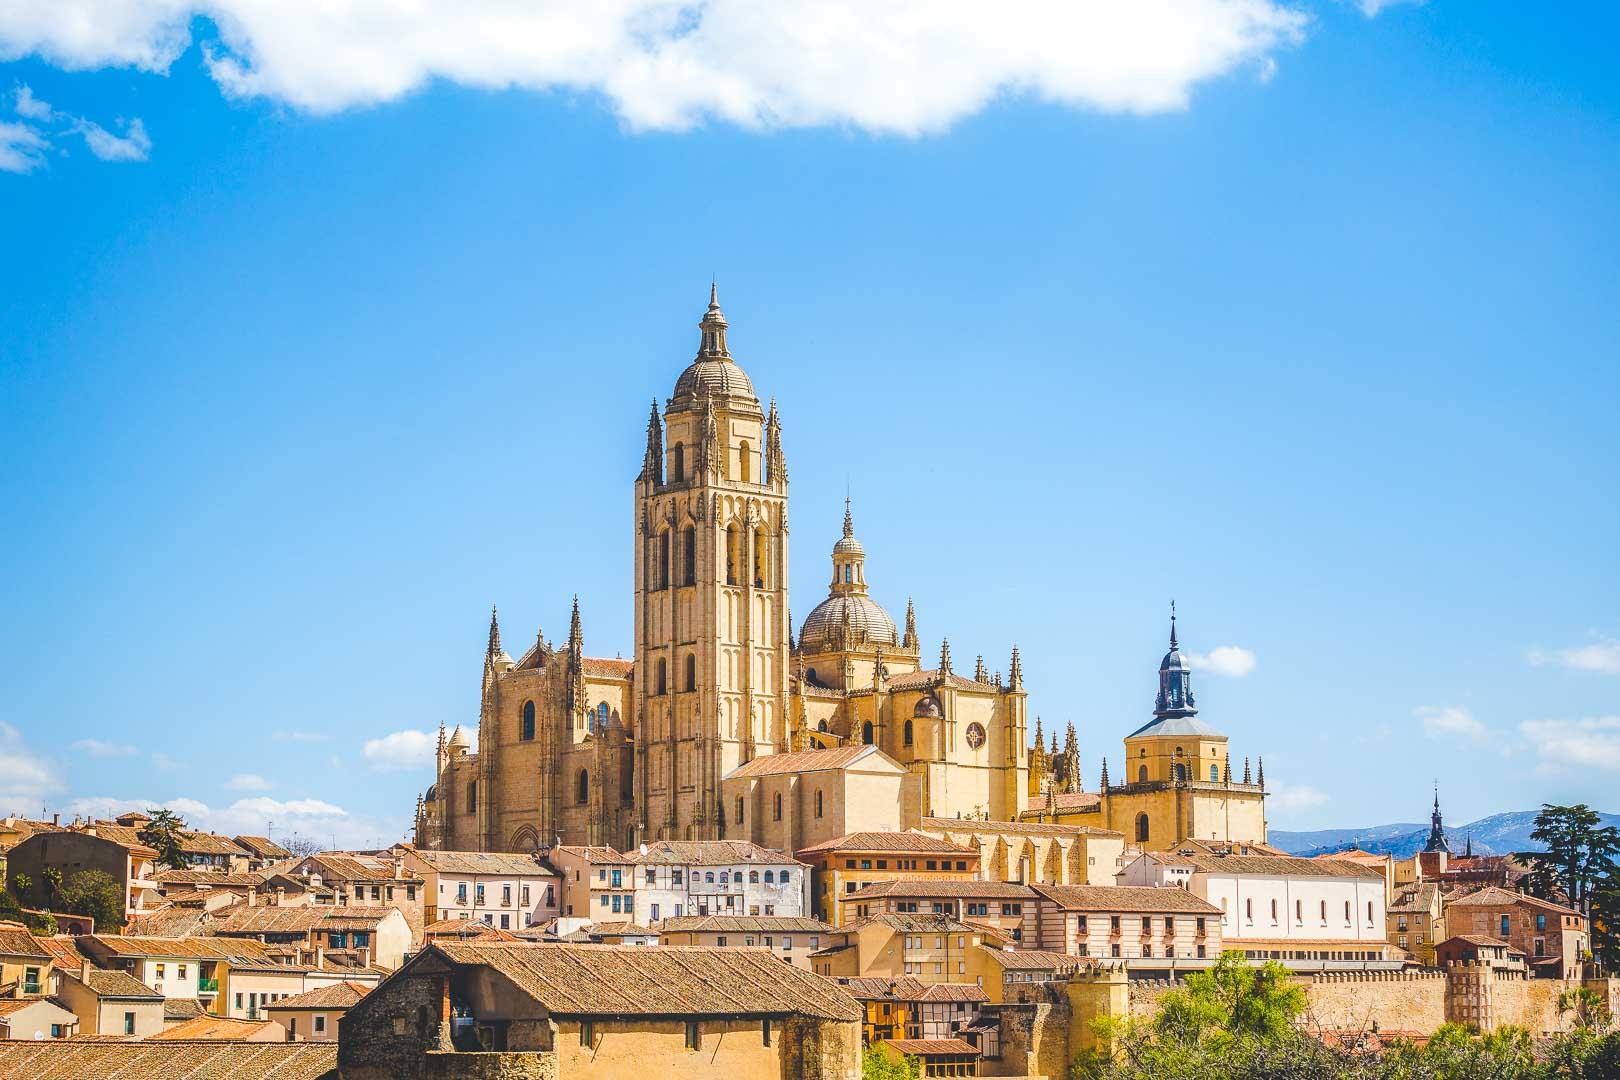 the segovia cathedral one of the monuments you will see on a day trip from madrid to segovia